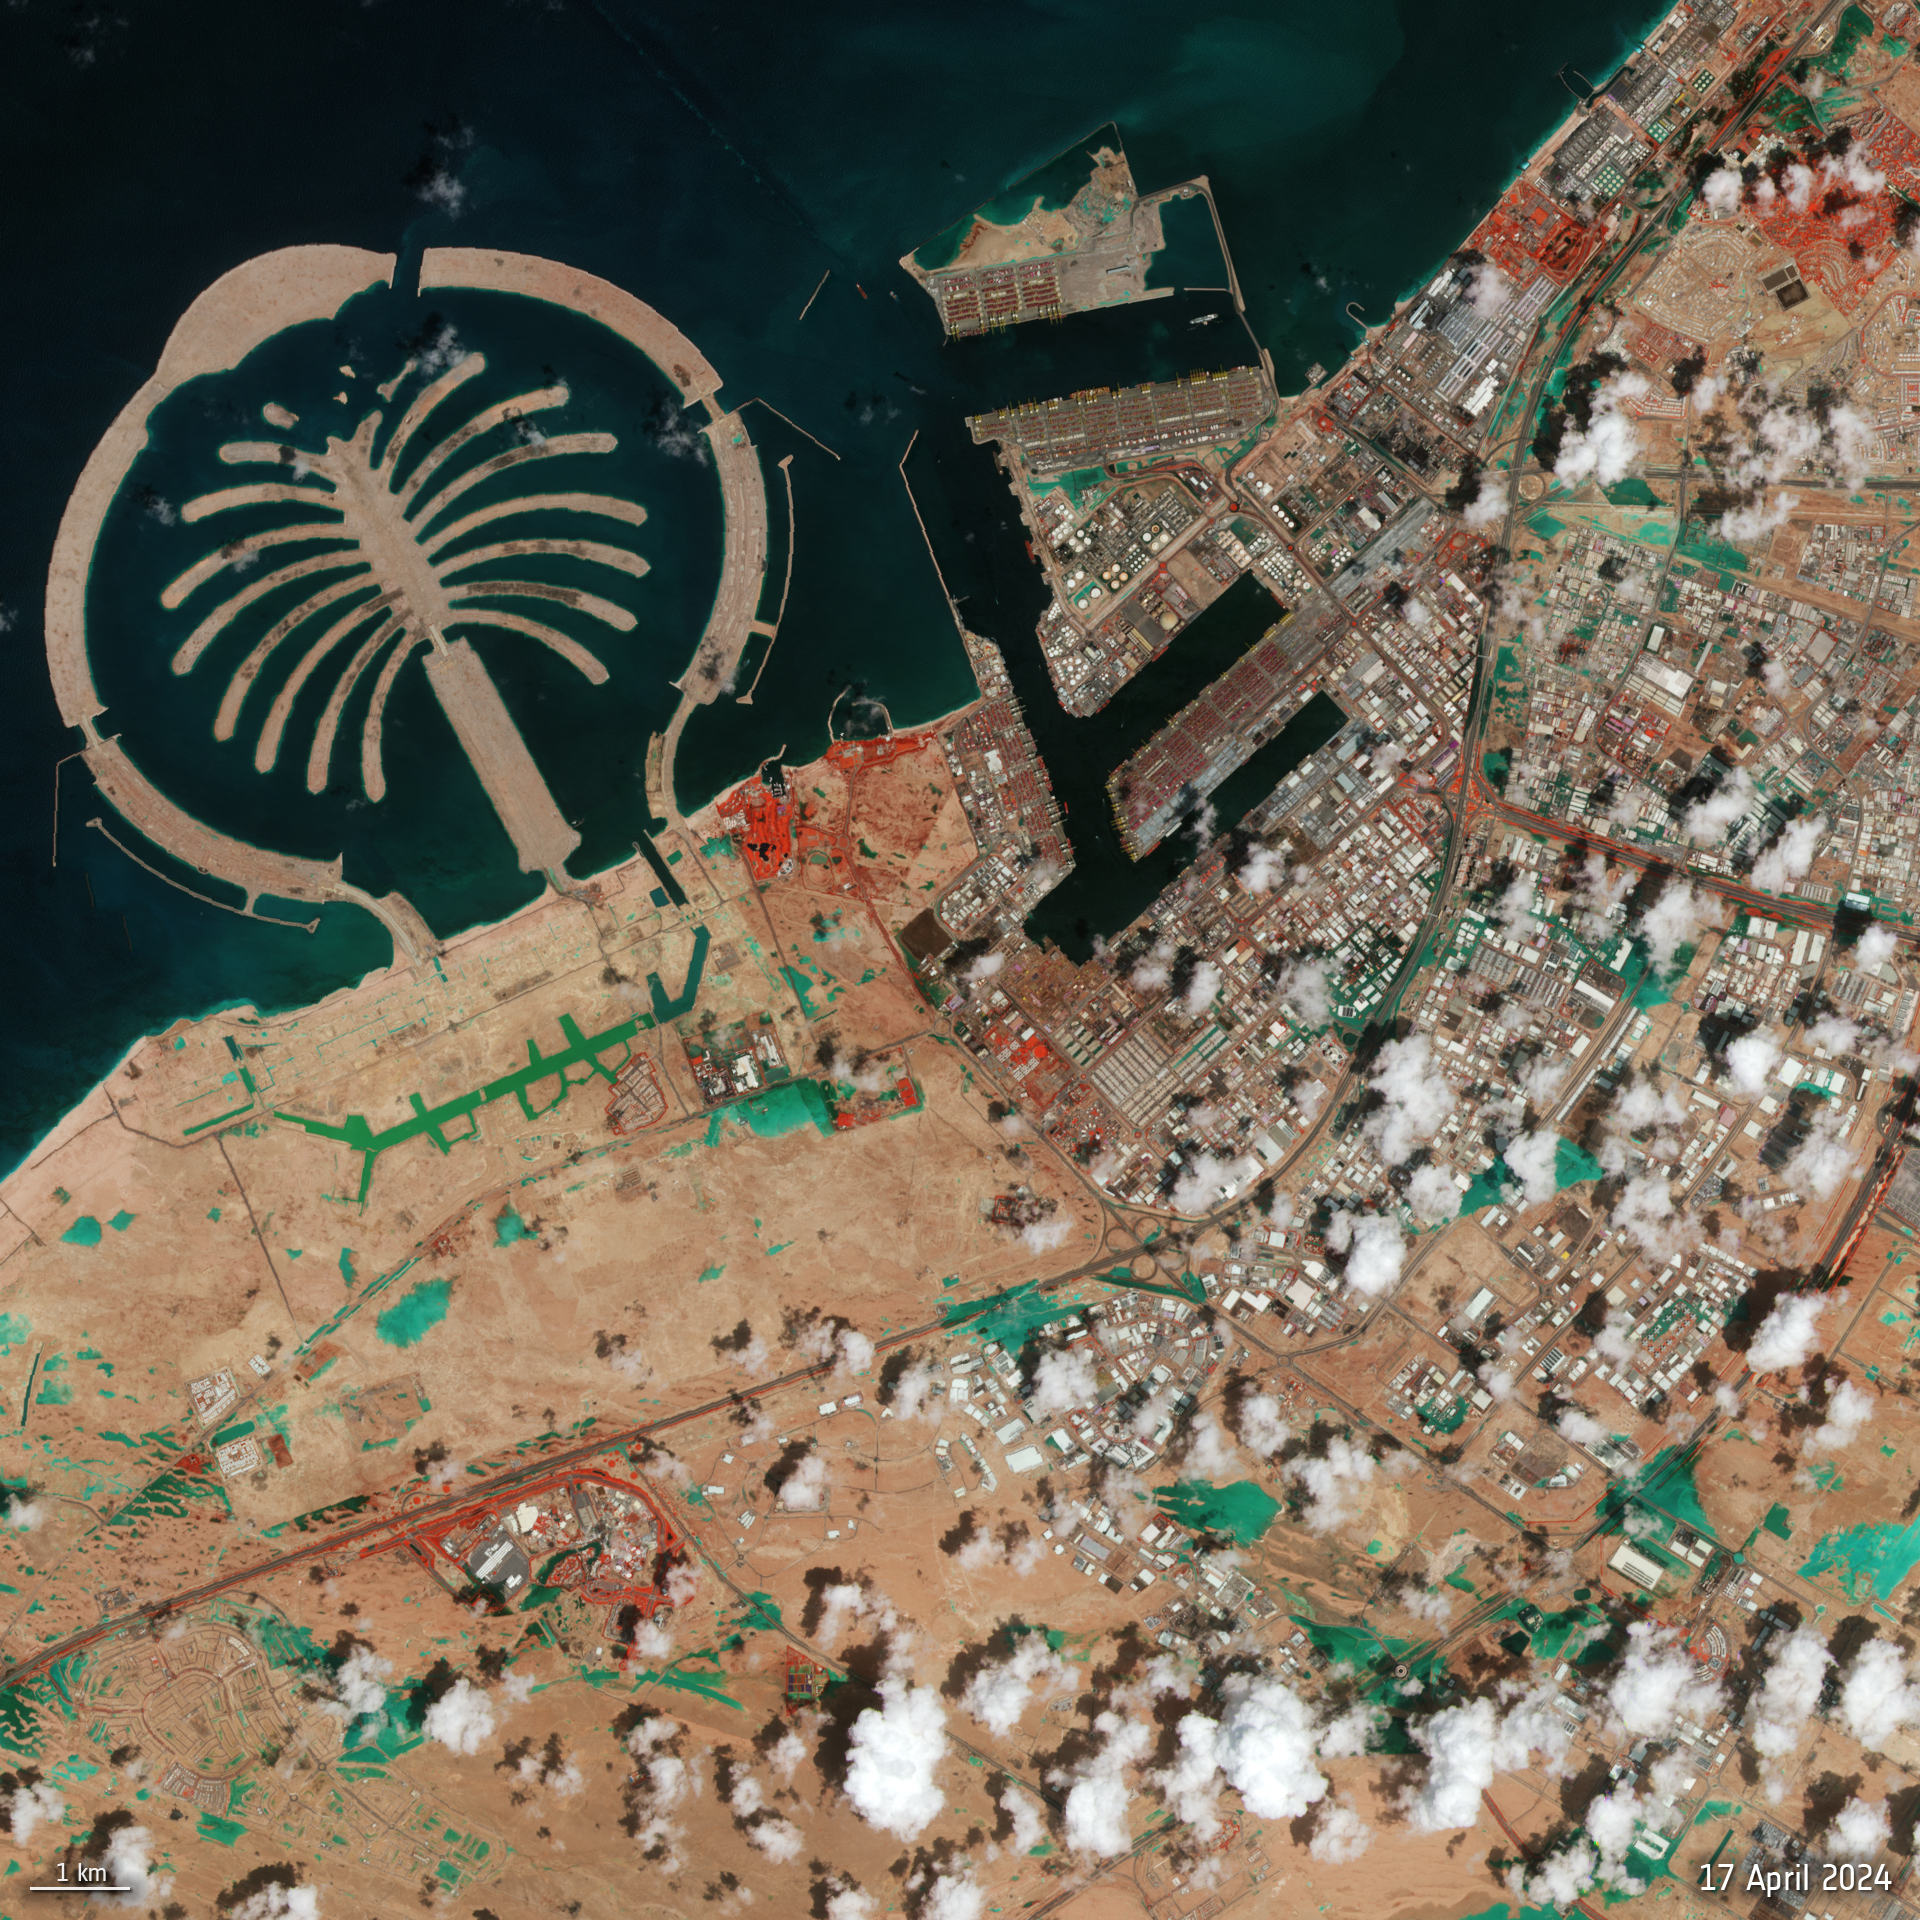 A satellite image of Dubai showing the iconic Jumeriah palm tree island. Areas of flooding are highlighted in light blue.